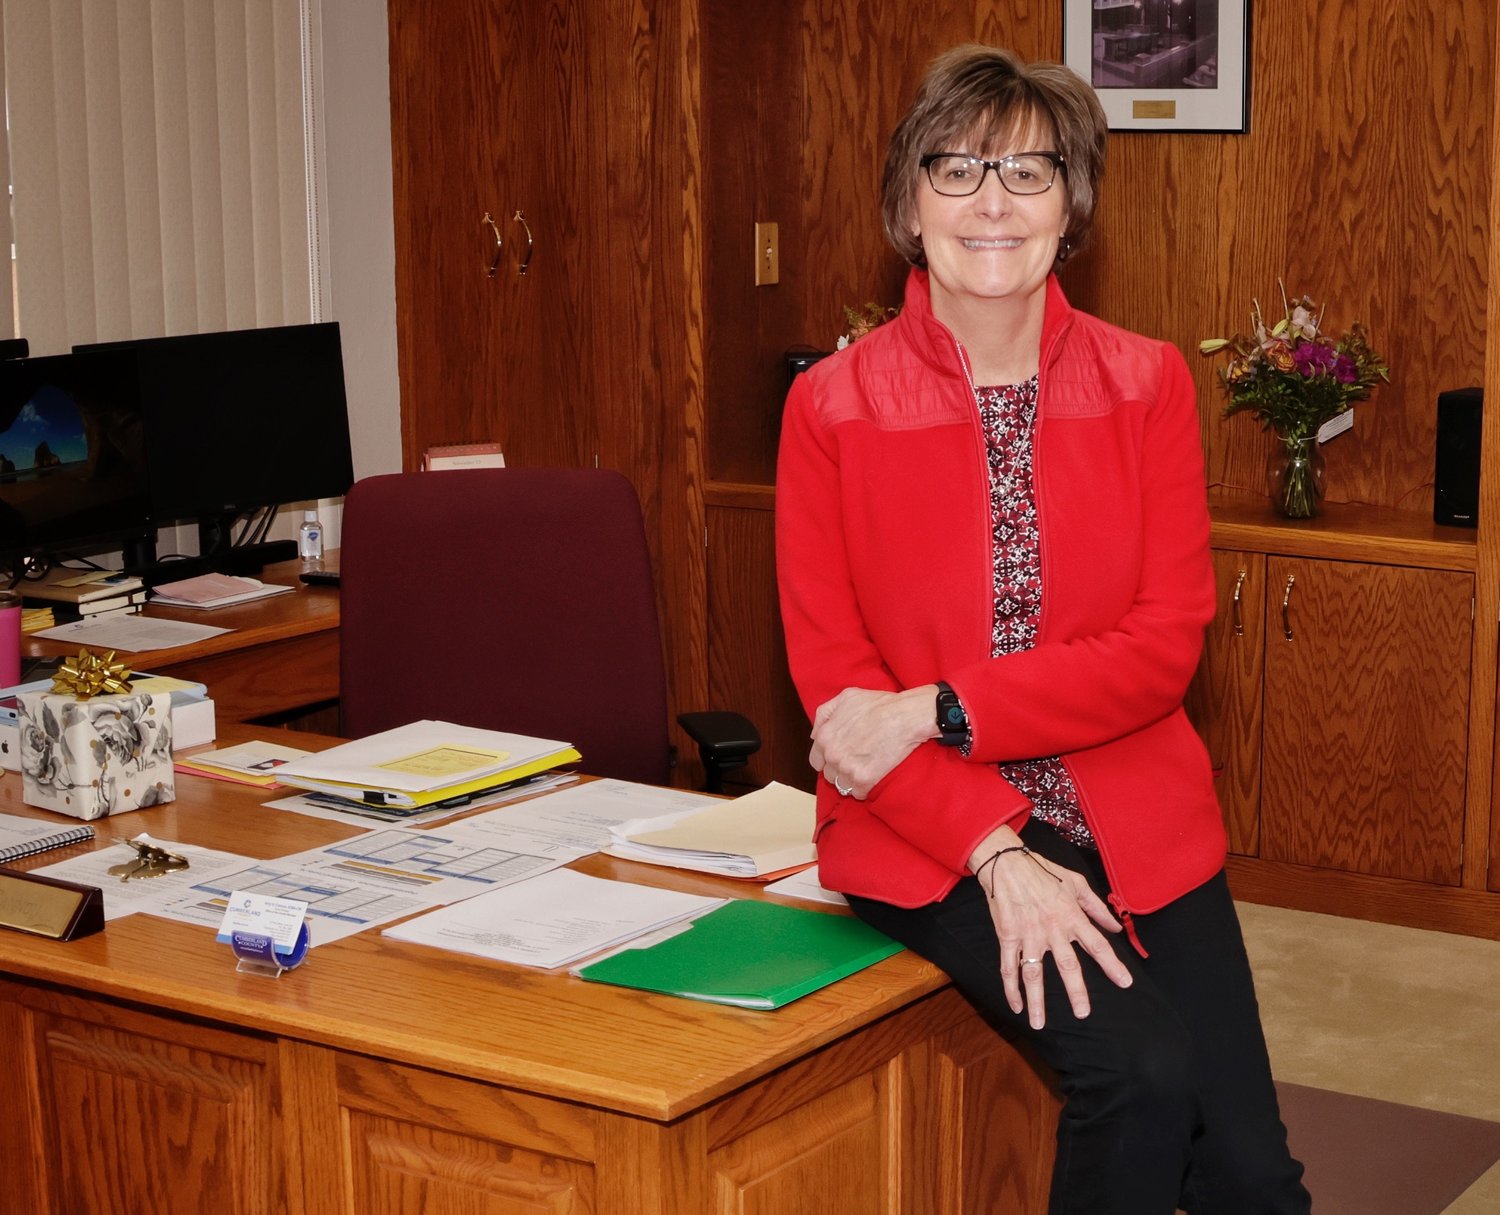 Amy Cannon, who is retiring as Cumberland County manager, says instituting policies to ensure financial stability was among her proudest achievements.